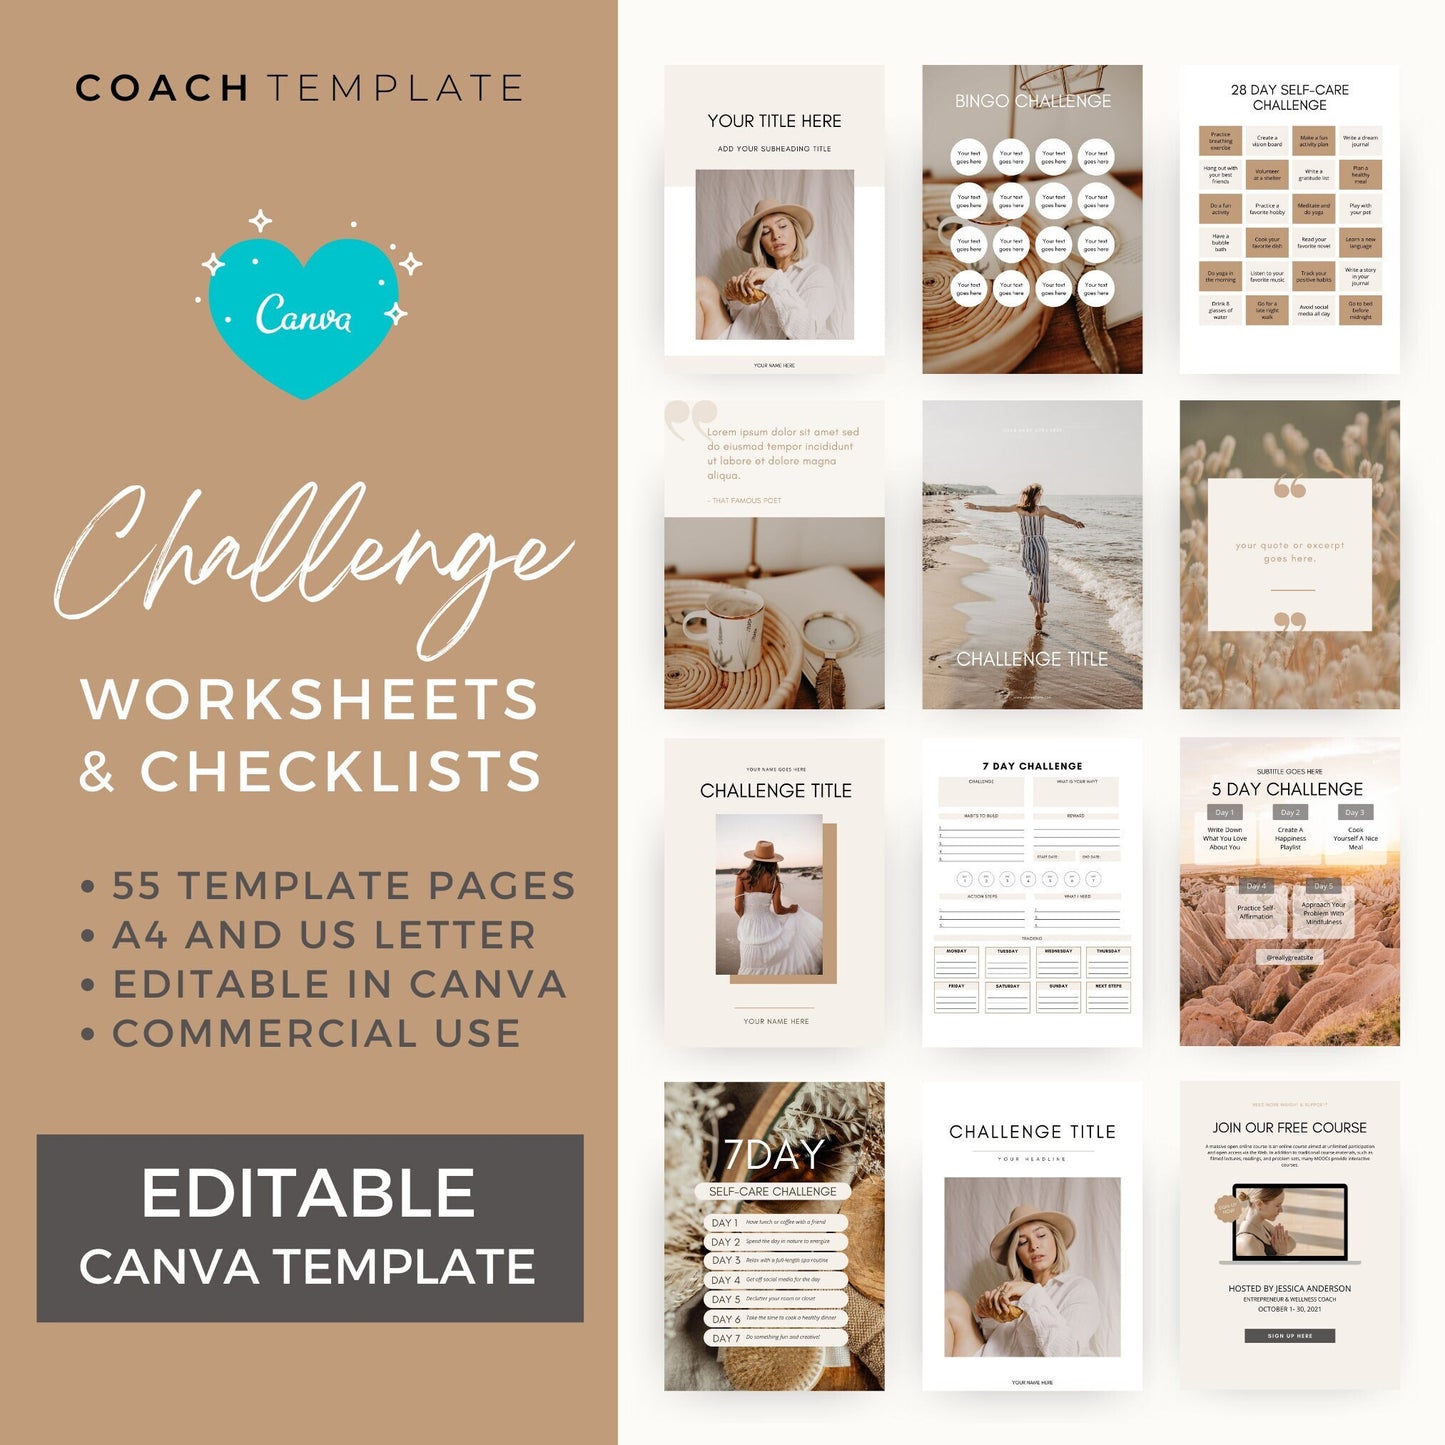 Challenge Worksheet Canva Template | Commercial Use Workbook Lead Magnet for Life Wellness Coach Spiritual business course content creator